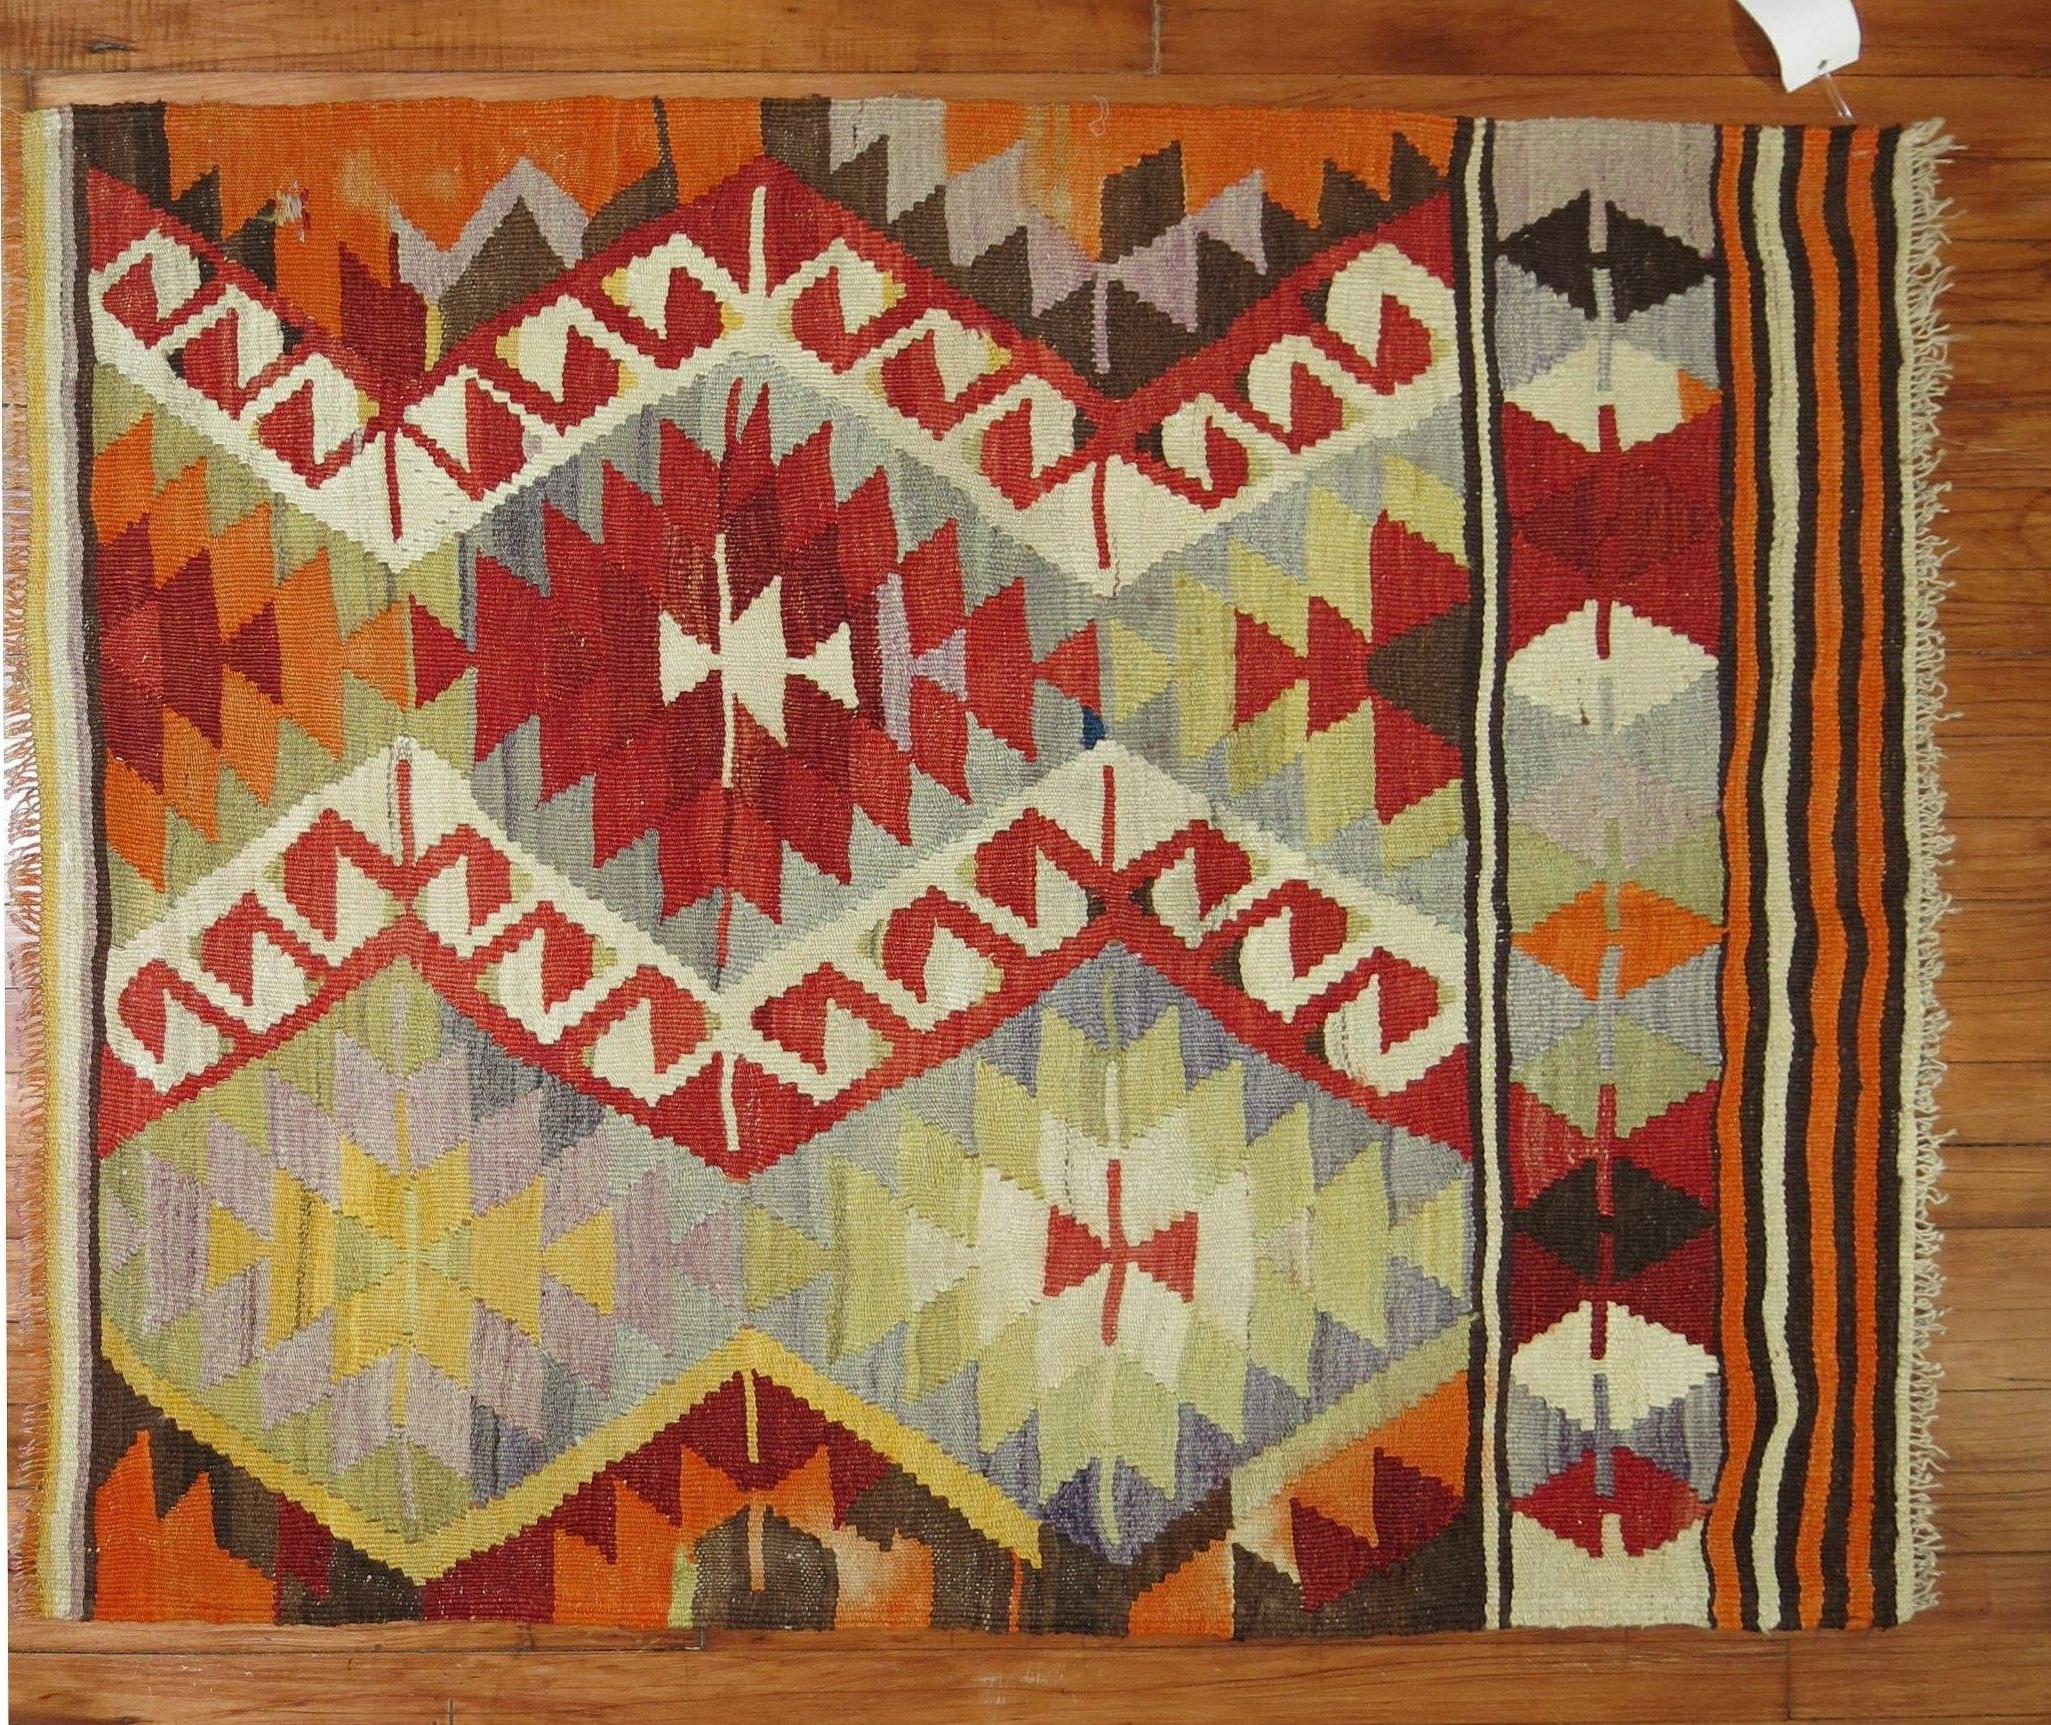 A vintage Turkish Kilim scatter rug from the mid-20th century.